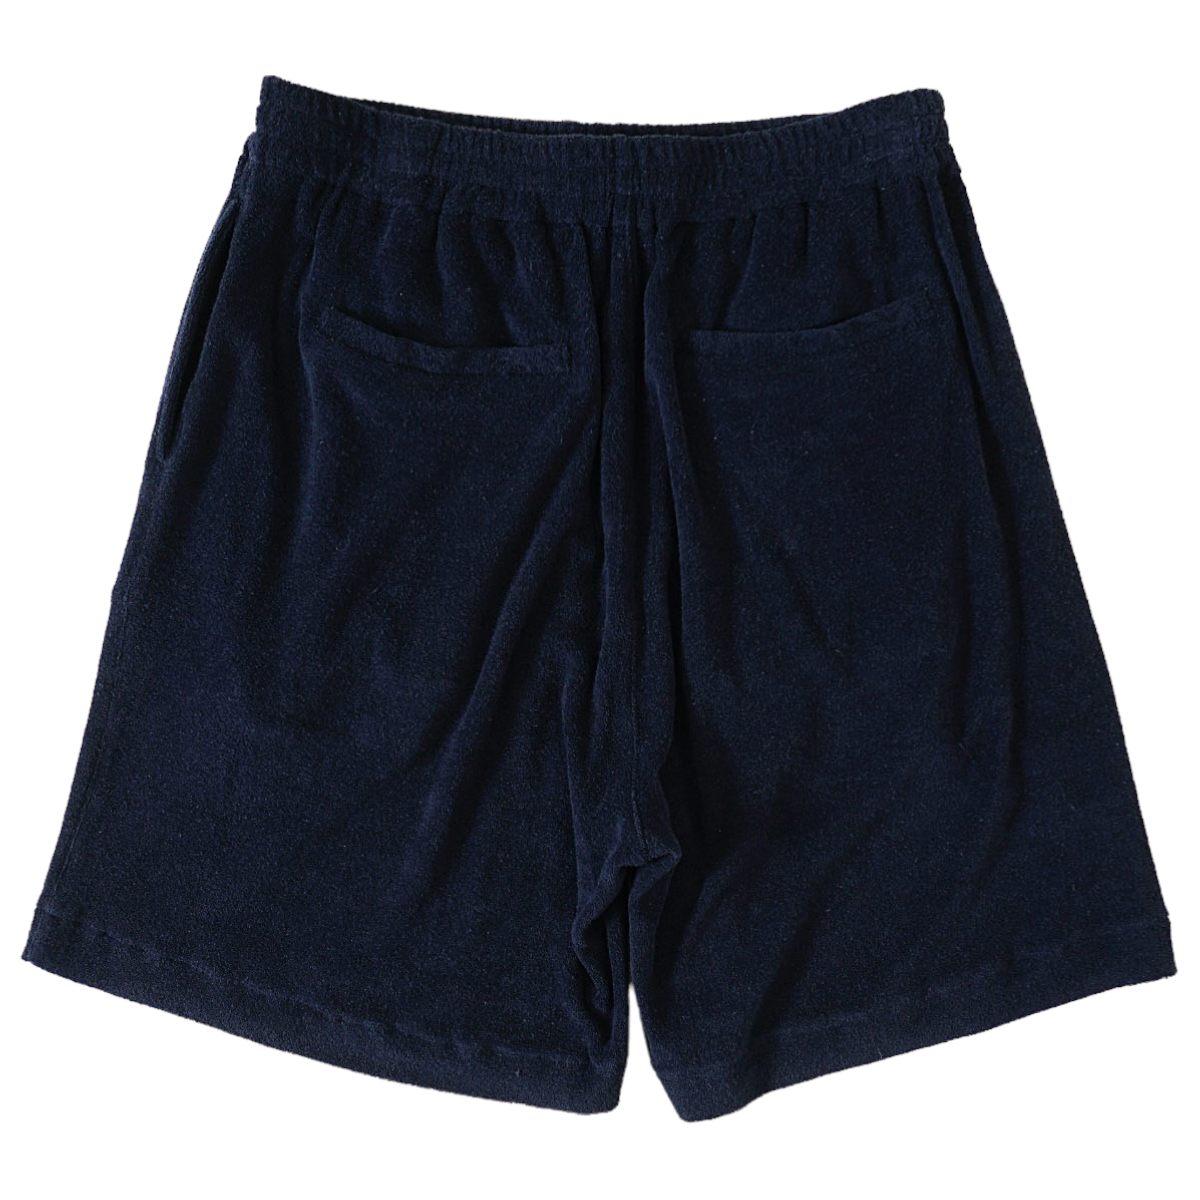 UNIVERSAL PRODUCTS《ユニバーサルプロダクツ》COTTON LINEN PILE SHORTS(231-60507) -  BlackSheep【ブラックシープ】Official Online Store